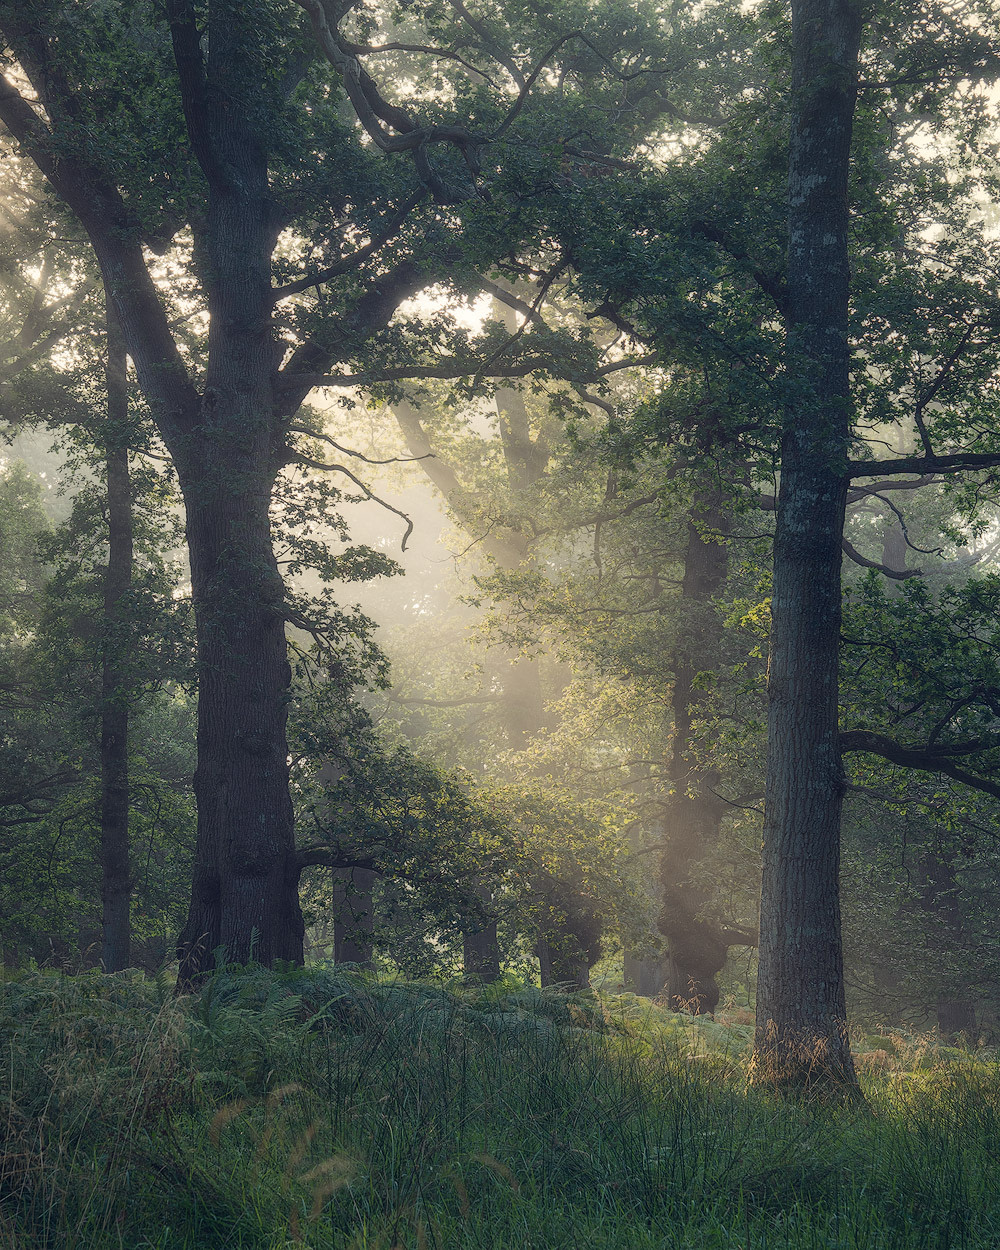 Warm light rays in a misty forest scene